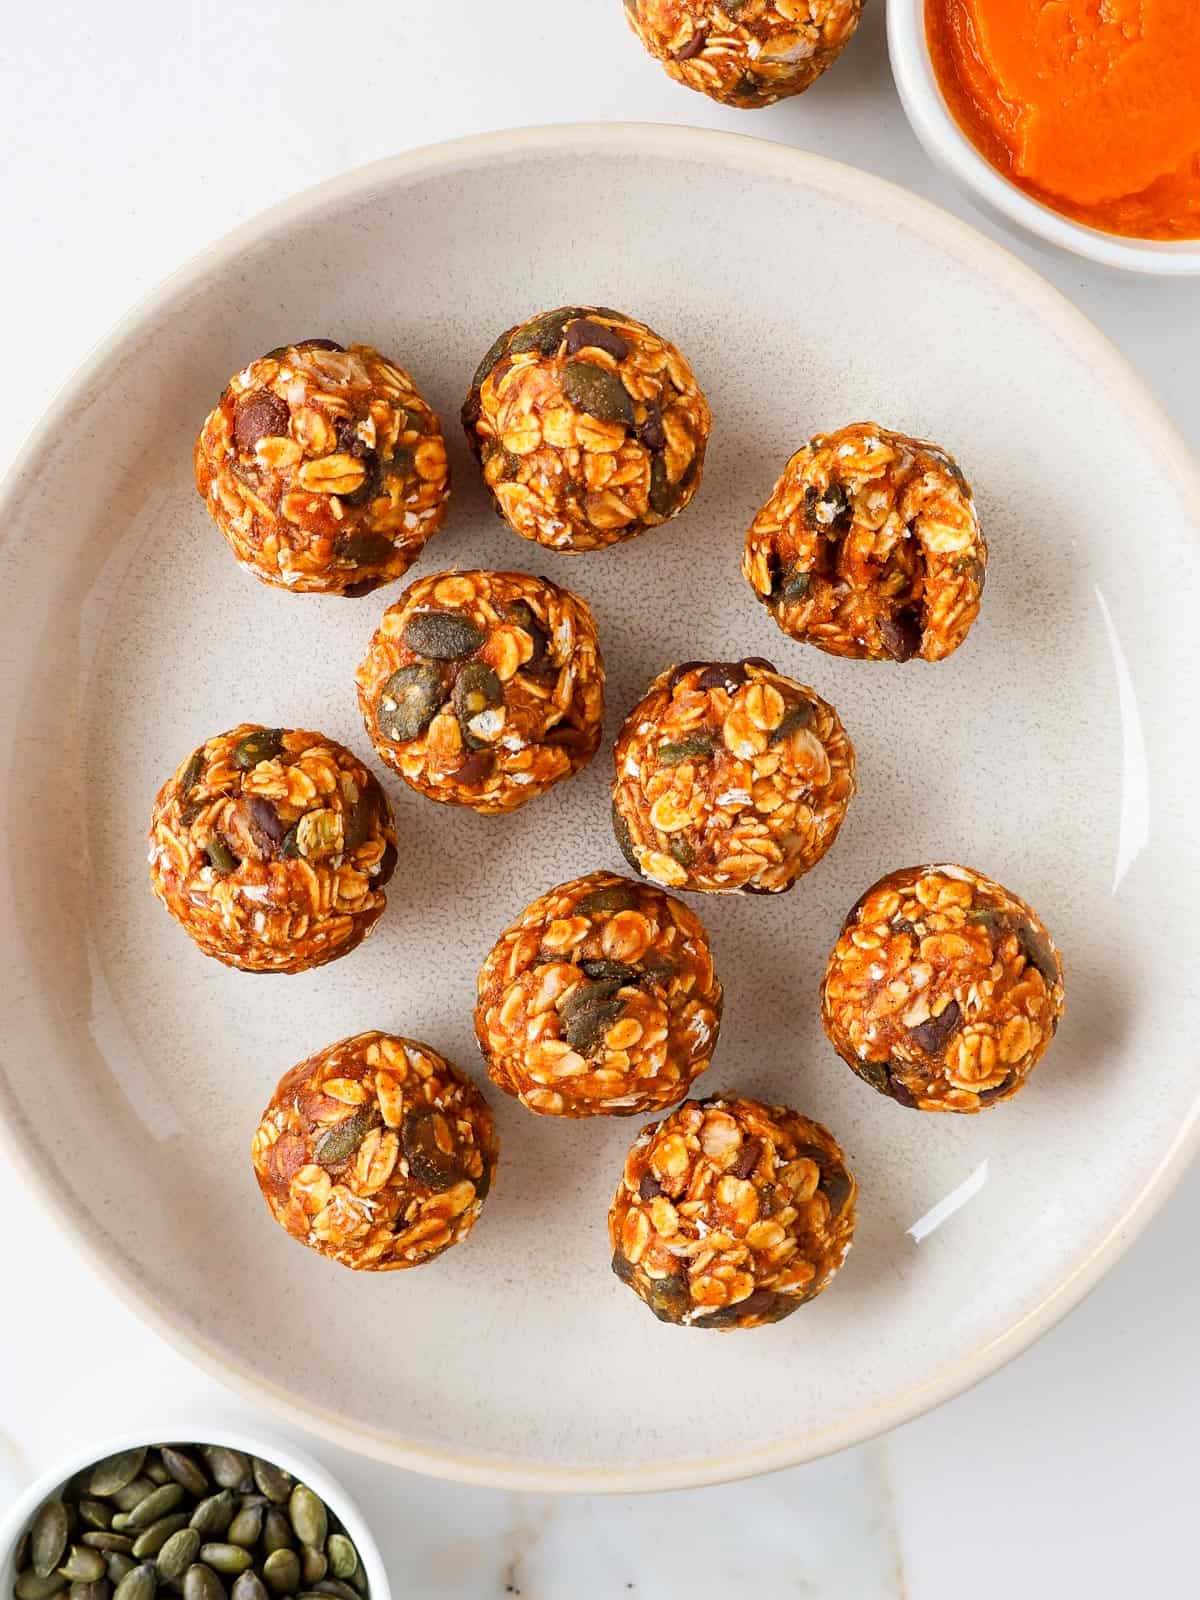 Pumpkin protein balls in a bowl with pumpkin puree and pumpkin seeds on the side. One ball has a bite.